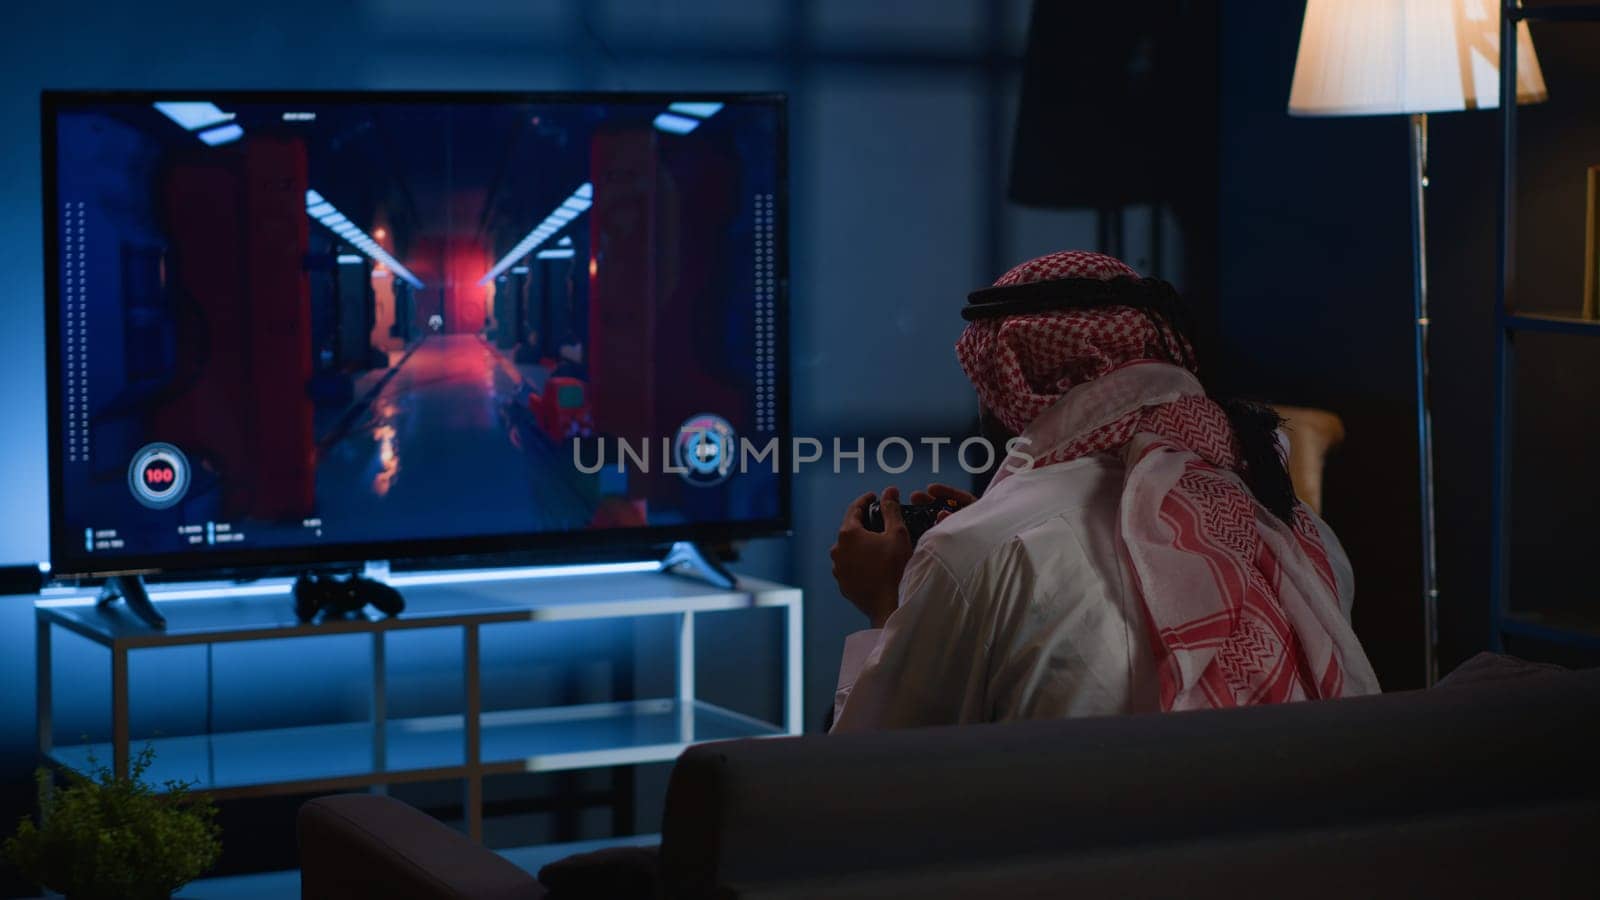 Arab man playing videogames on TV, relaxing after long day at work. Competitive gamer having fun on gaming console in stylish apartment living room, enjoying science fiction shooter game